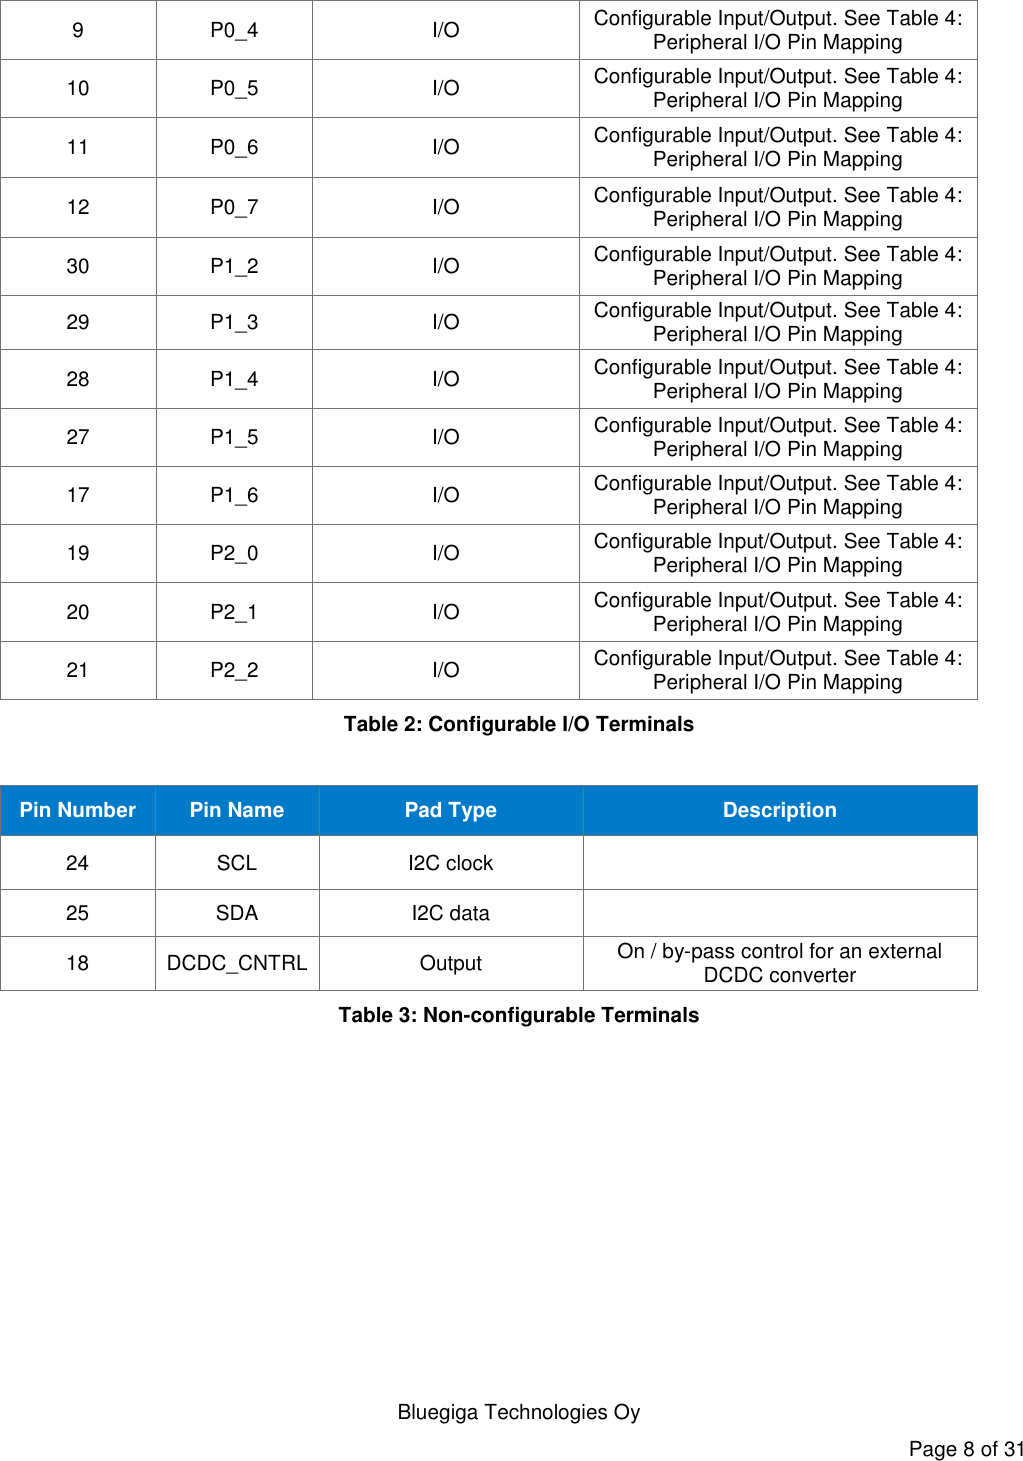   Bluegiga Technologies Oy Page 8 of 31 9 P0_4 I/O Configurable Input/Output. See Table 4: Peripheral I/O Pin Mapping 10 P0_5 I/O Configurable Input/Output. See Table 4: Peripheral I/O Pin Mapping 11 P0_6 I/O Configurable Input/Output. See Table 4: Peripheral I/O Pin Mapping 12 P0_7 I/O Configurable Input/Output. See Table 4: Peripheral I/O Pin Mapping 30 P1_2 I/O Configurable Input/Output. See Table 4: Peripheral I/O Pin Mapping 29 P1_3 I/O Configurable Input/Output. See Table 4: Peripheral I/O Pin Mapping 28 P1_4 I/O Configurable Input/Output. See Table 4: Peripheral I/O Pin Mapping 27 P1_5 I/O Configurable Input/Output. See Table 4: Peripheral I/O Pin Mapping 17 P1_6 I/O Configurable Input/Output. See Table 4: Peripheral I/O Pin Mapping 19 P2_0 I/O Configurable Input/Output. See Table 4: Peripheral I/O Pin Mapping 20 P2_1 I/O Configurable Input/Output. See Table 4: Peripheral I/O Pin Mapping 21 P2_2 I/O Configurable Input/Output. See Table 4: Peripheral I/O Pin Mapping Table 2: Configurable I/O Terminals  Pin Number Pin Name Pad Type Description 24 SCL I2C clock  25 SDA I2C data  18 DCDC_CNTRL Output On / by-pass control for an external DCDC converter Table 3: Non-configurable Terminals